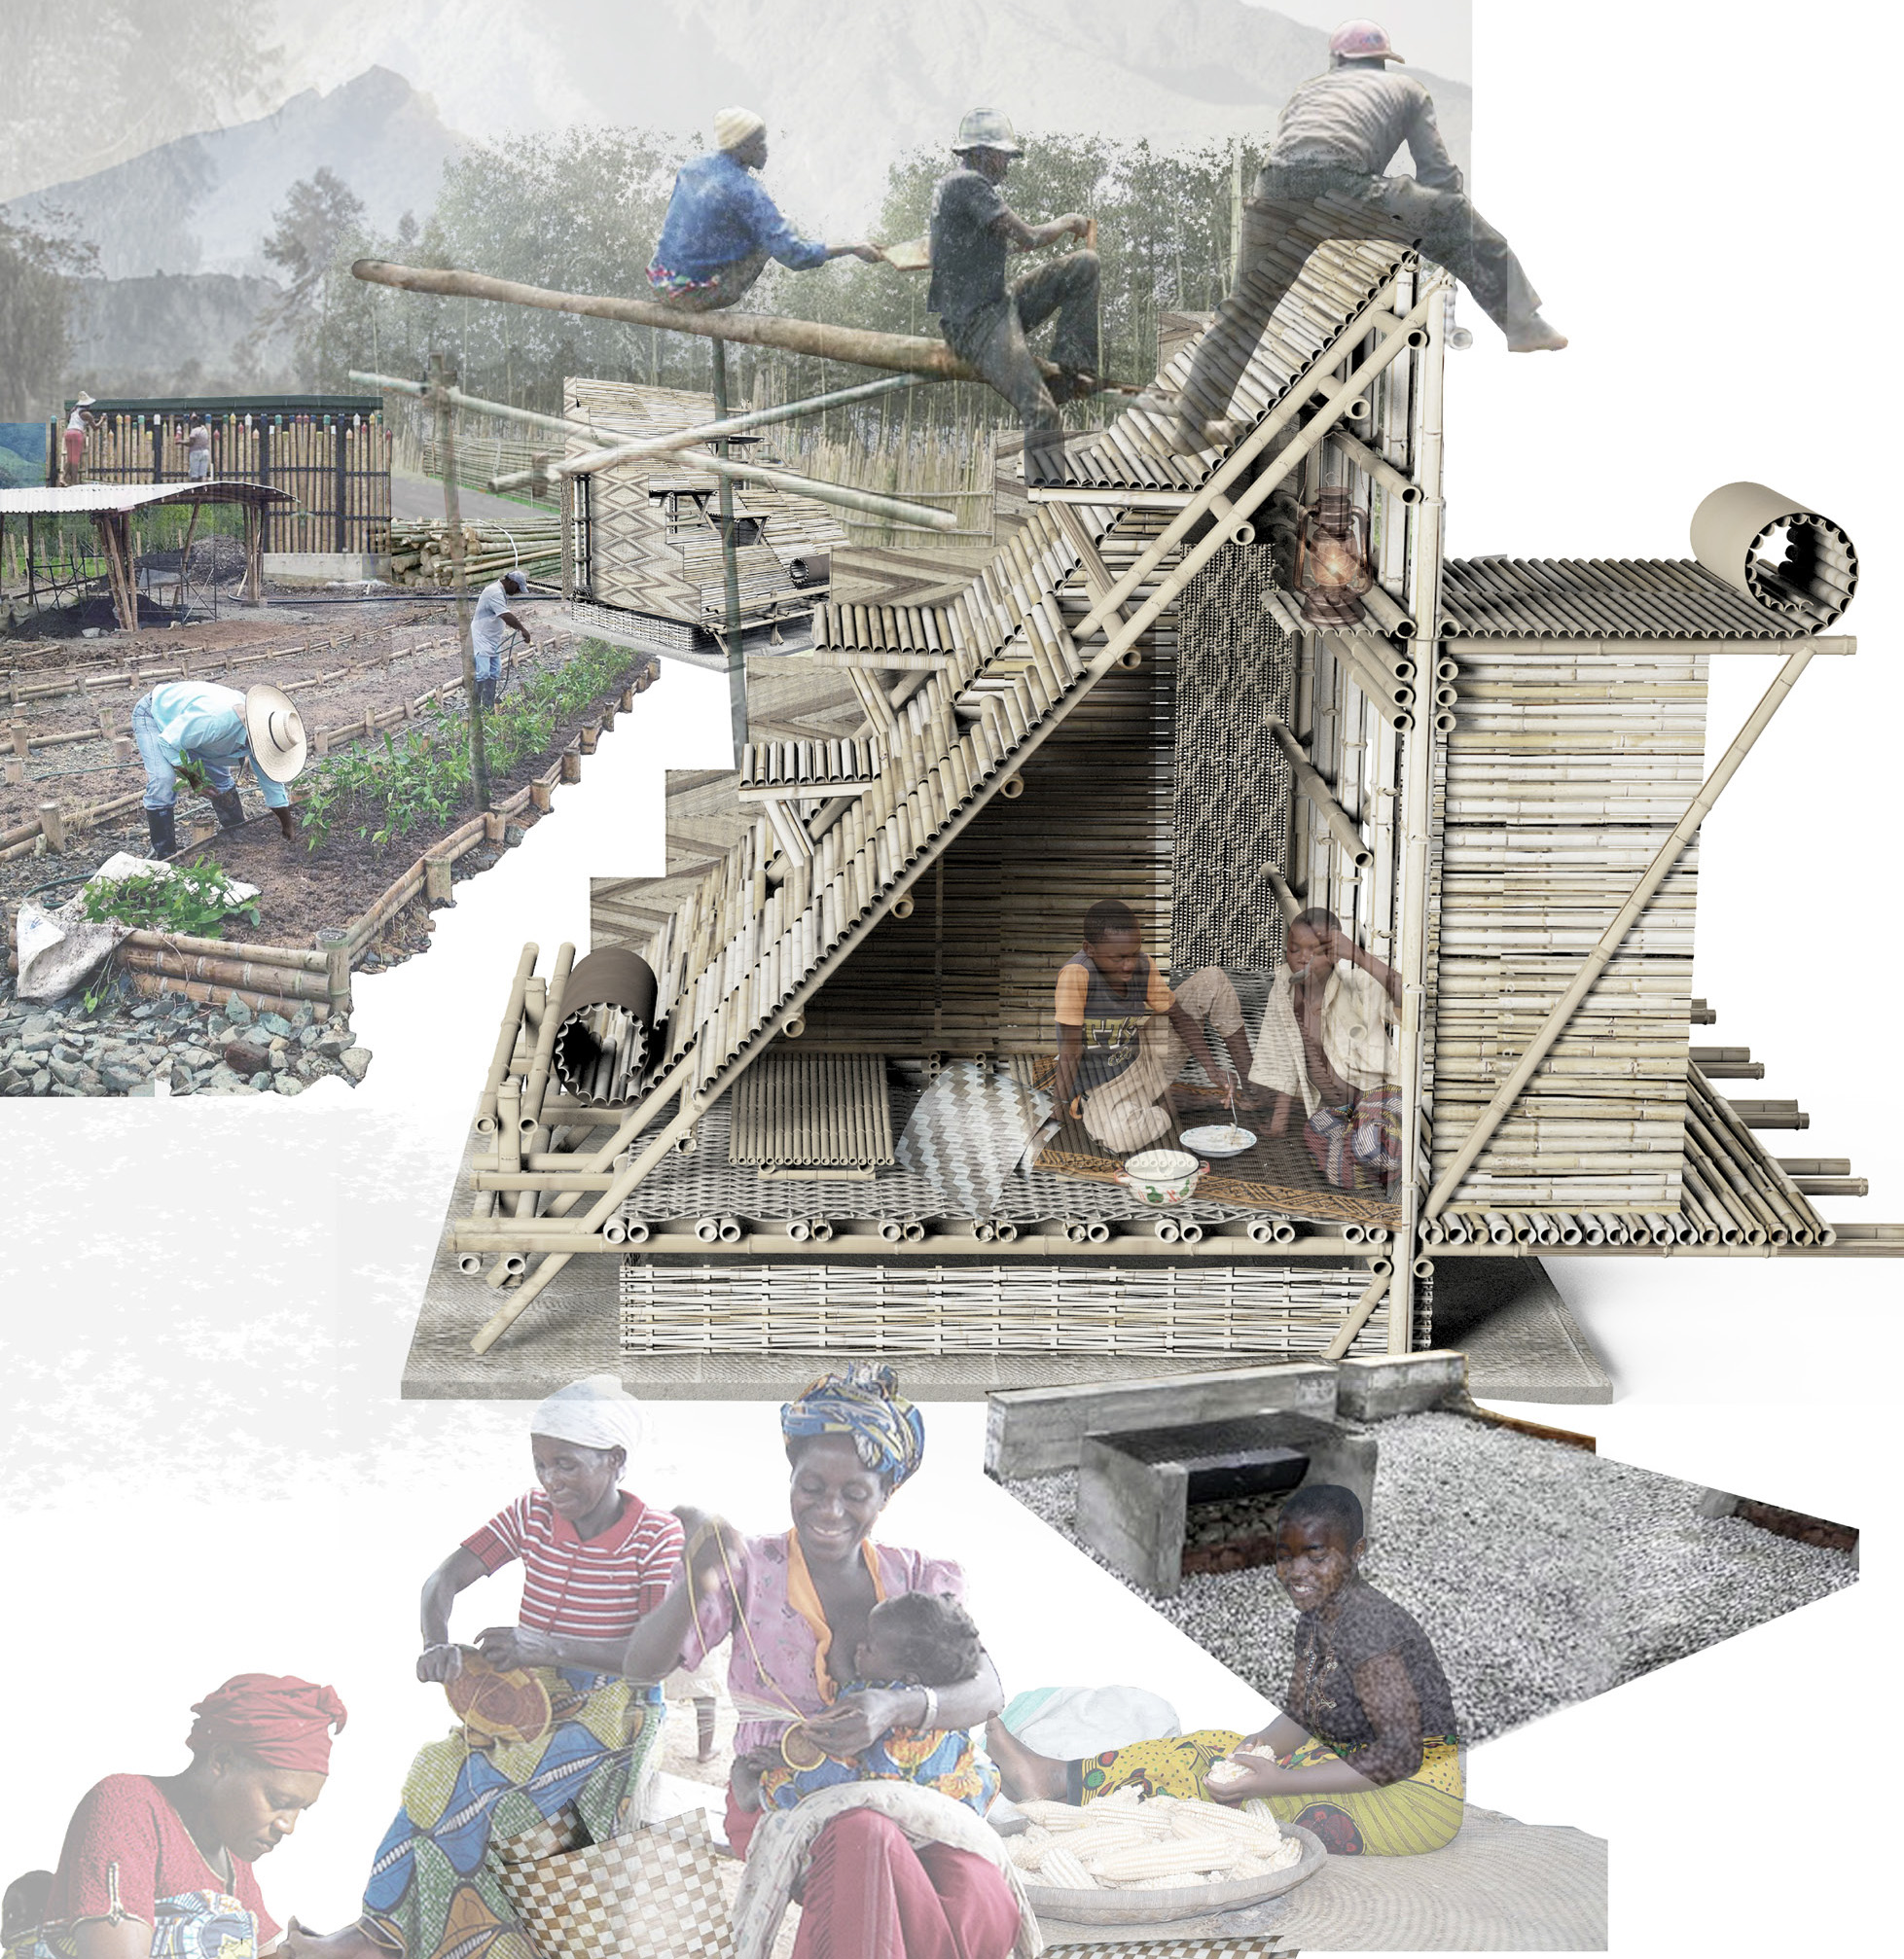 A study on alternative housing “Kimbilio” for internally displaced populations